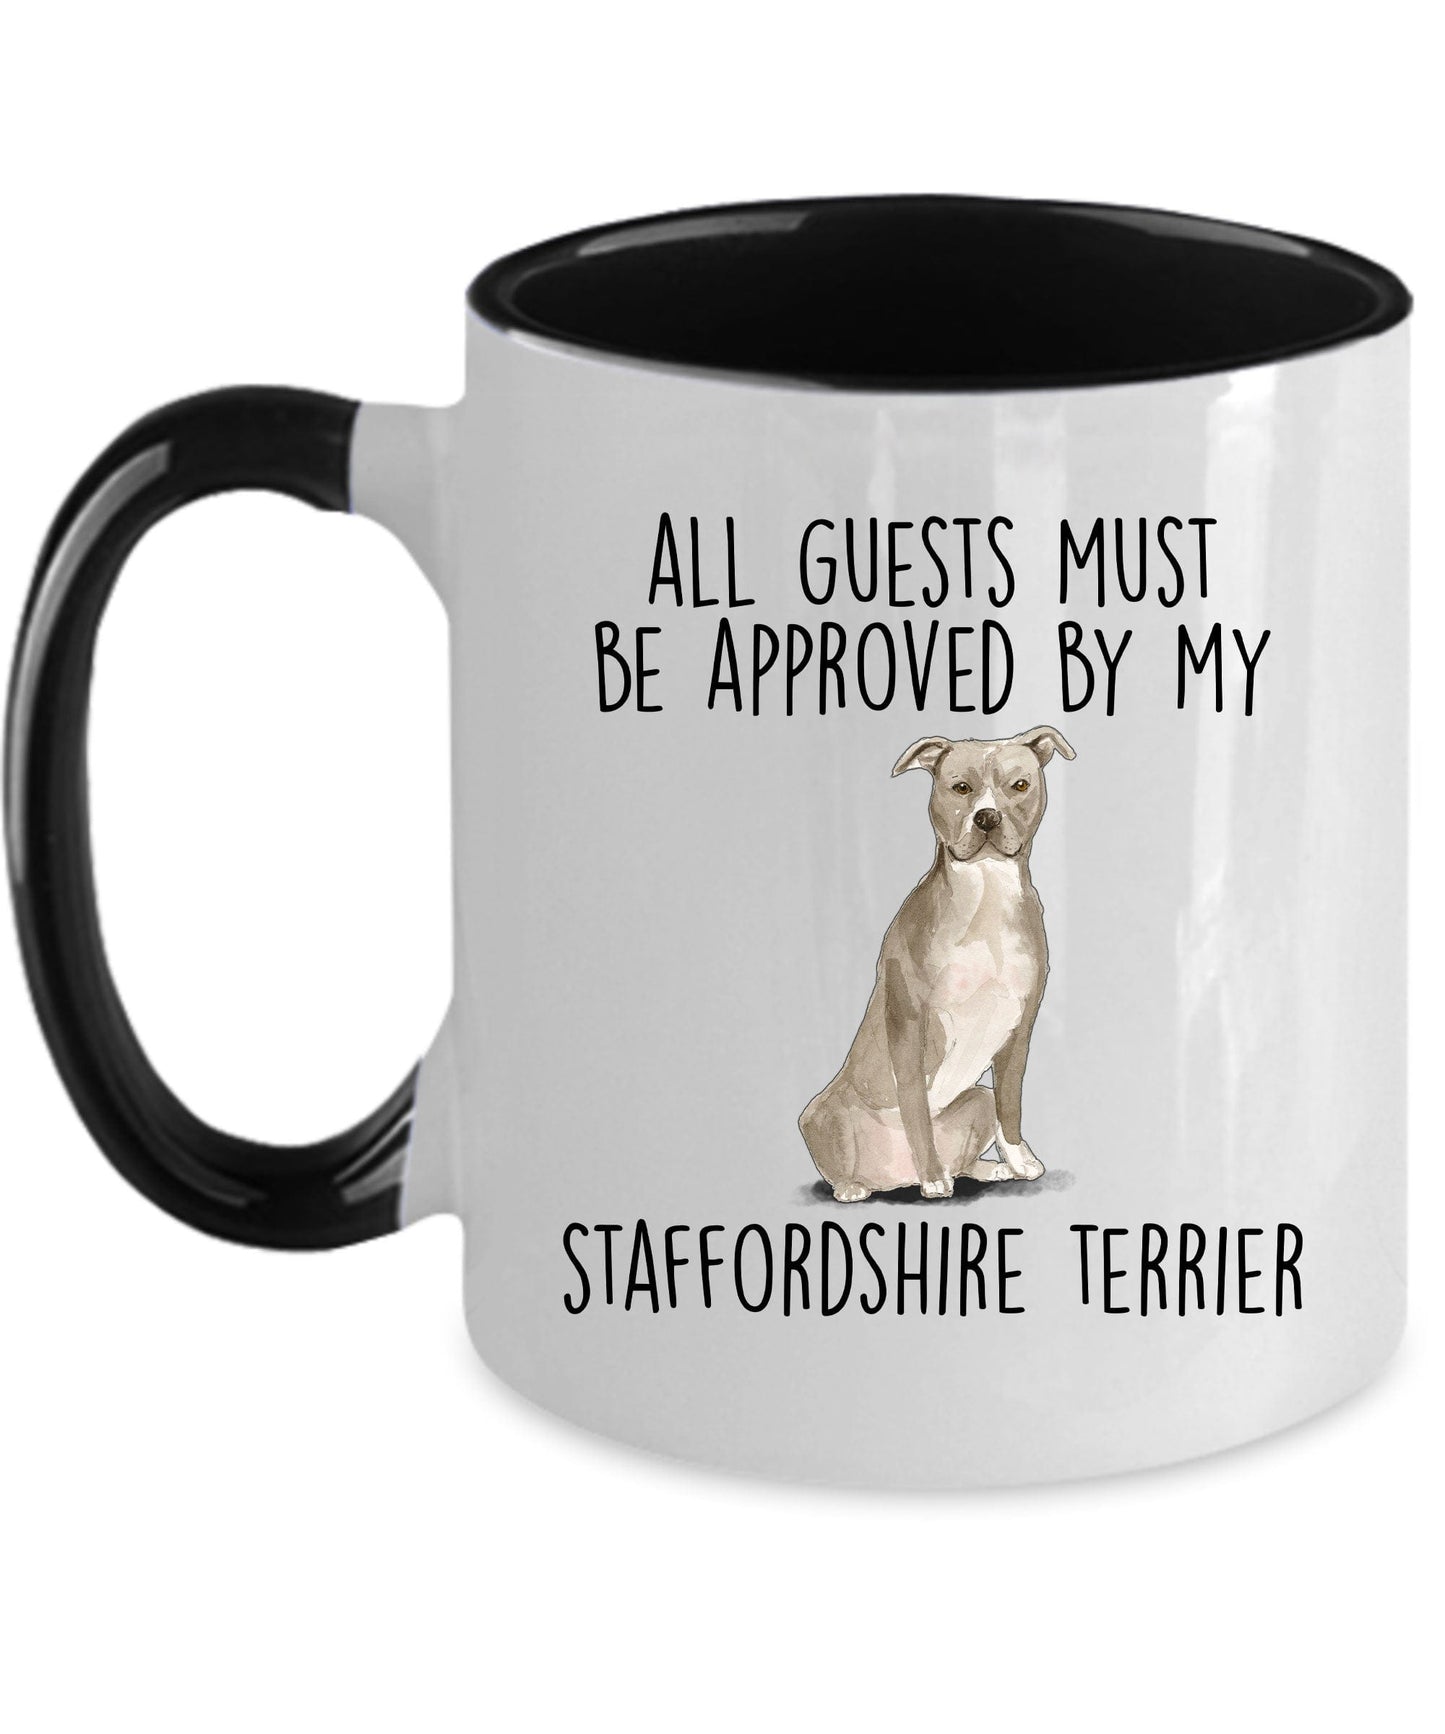 American Staffordshire Terrier - Pitbull - ceramic coffee mug - All guests must be approved